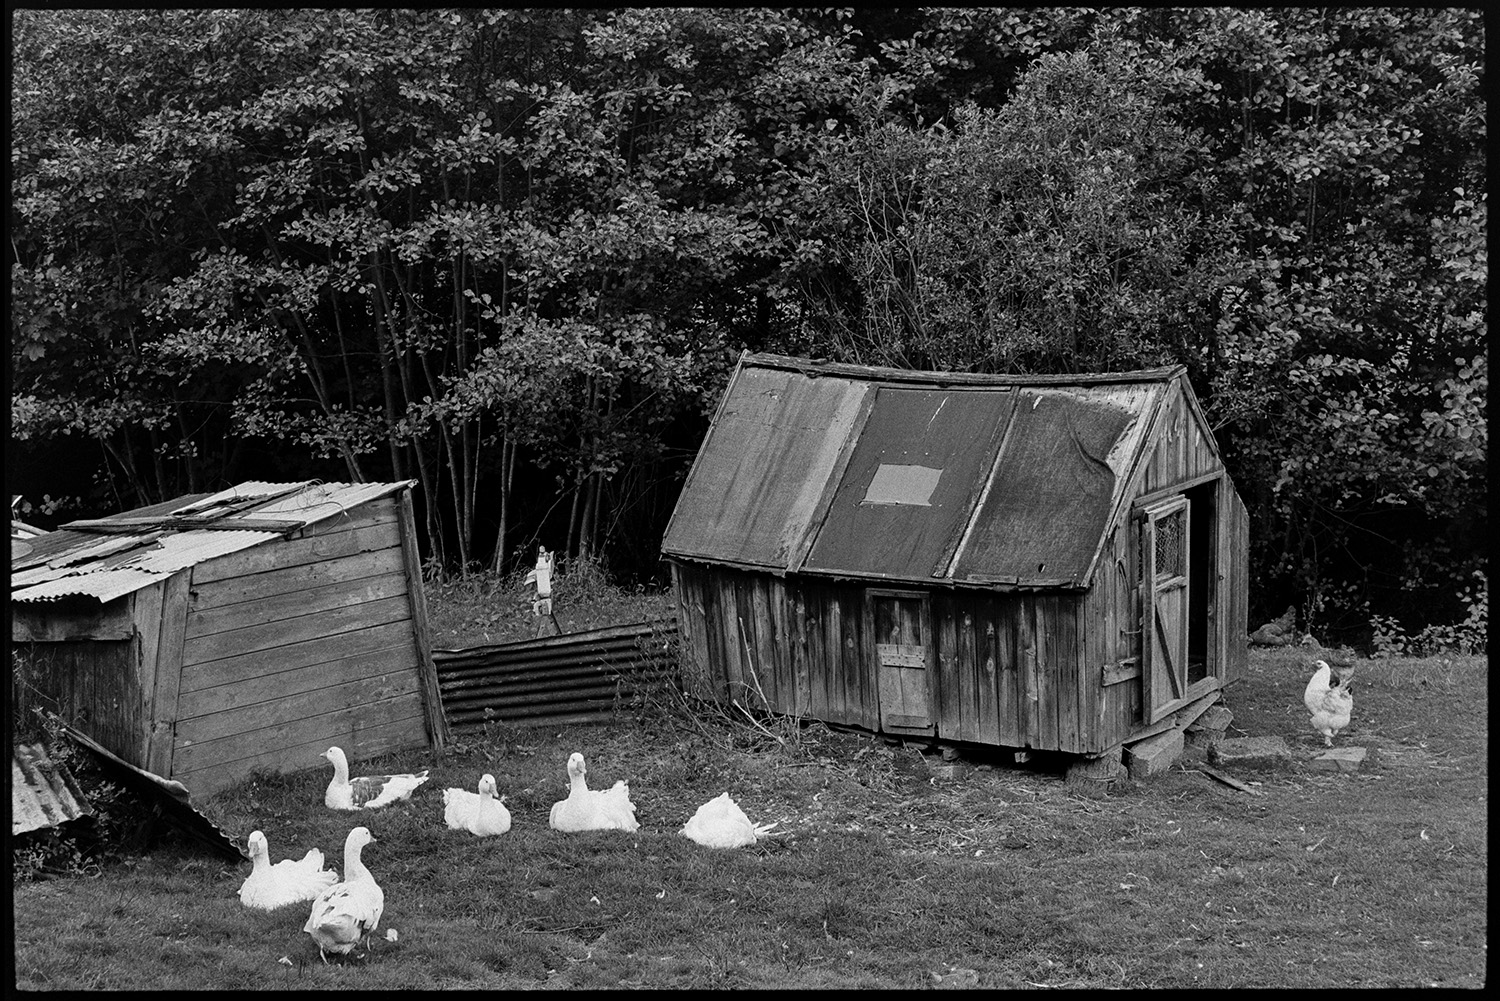 Landscape with geese and poultry house.
[Geese and a hen by wooden poultry houses in a field at Millhams, Dolton. Trees can be seen behind the poultry houses.]